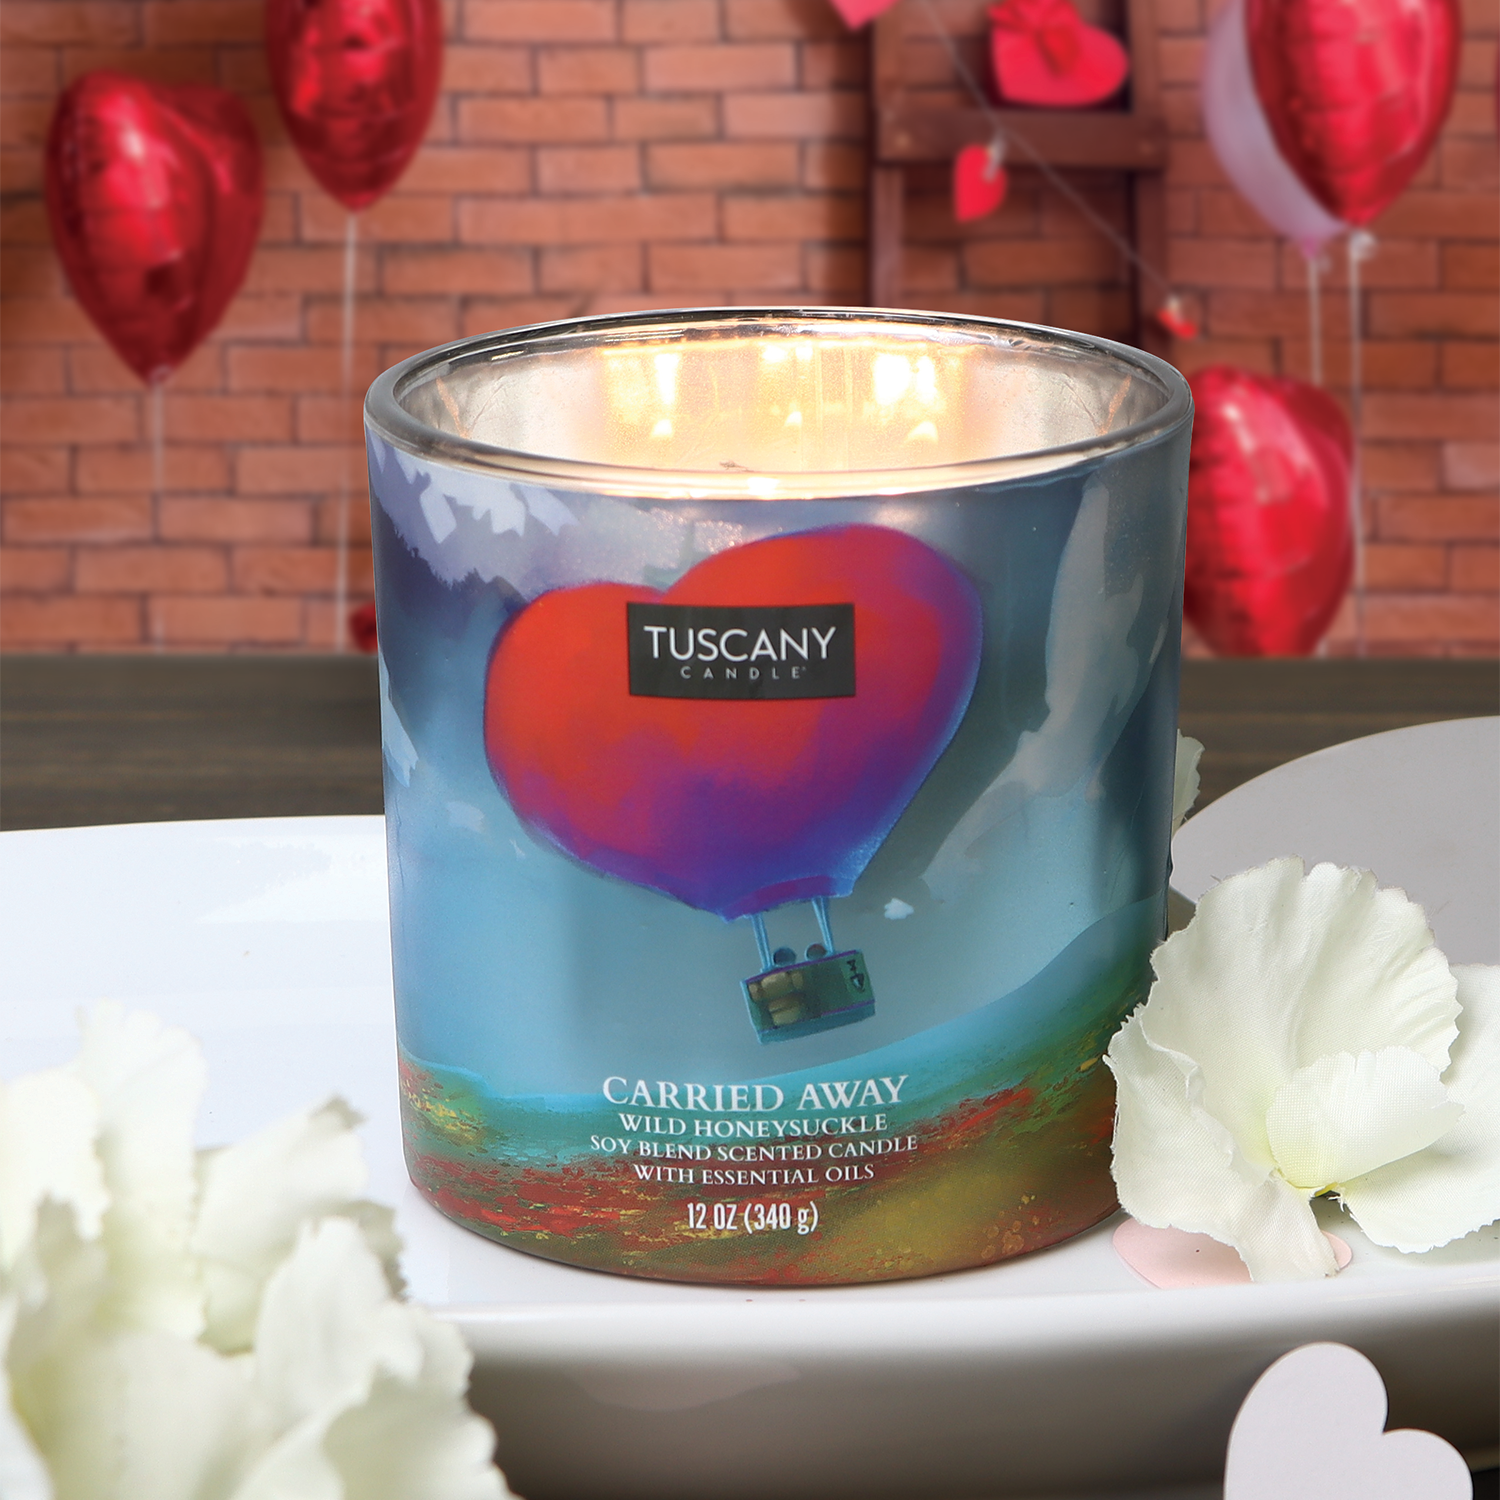 A Tuscany Candle® SEASONAL Carried Away Scented Jar Candle (12 oz) – Carried Away Collection on a plate.